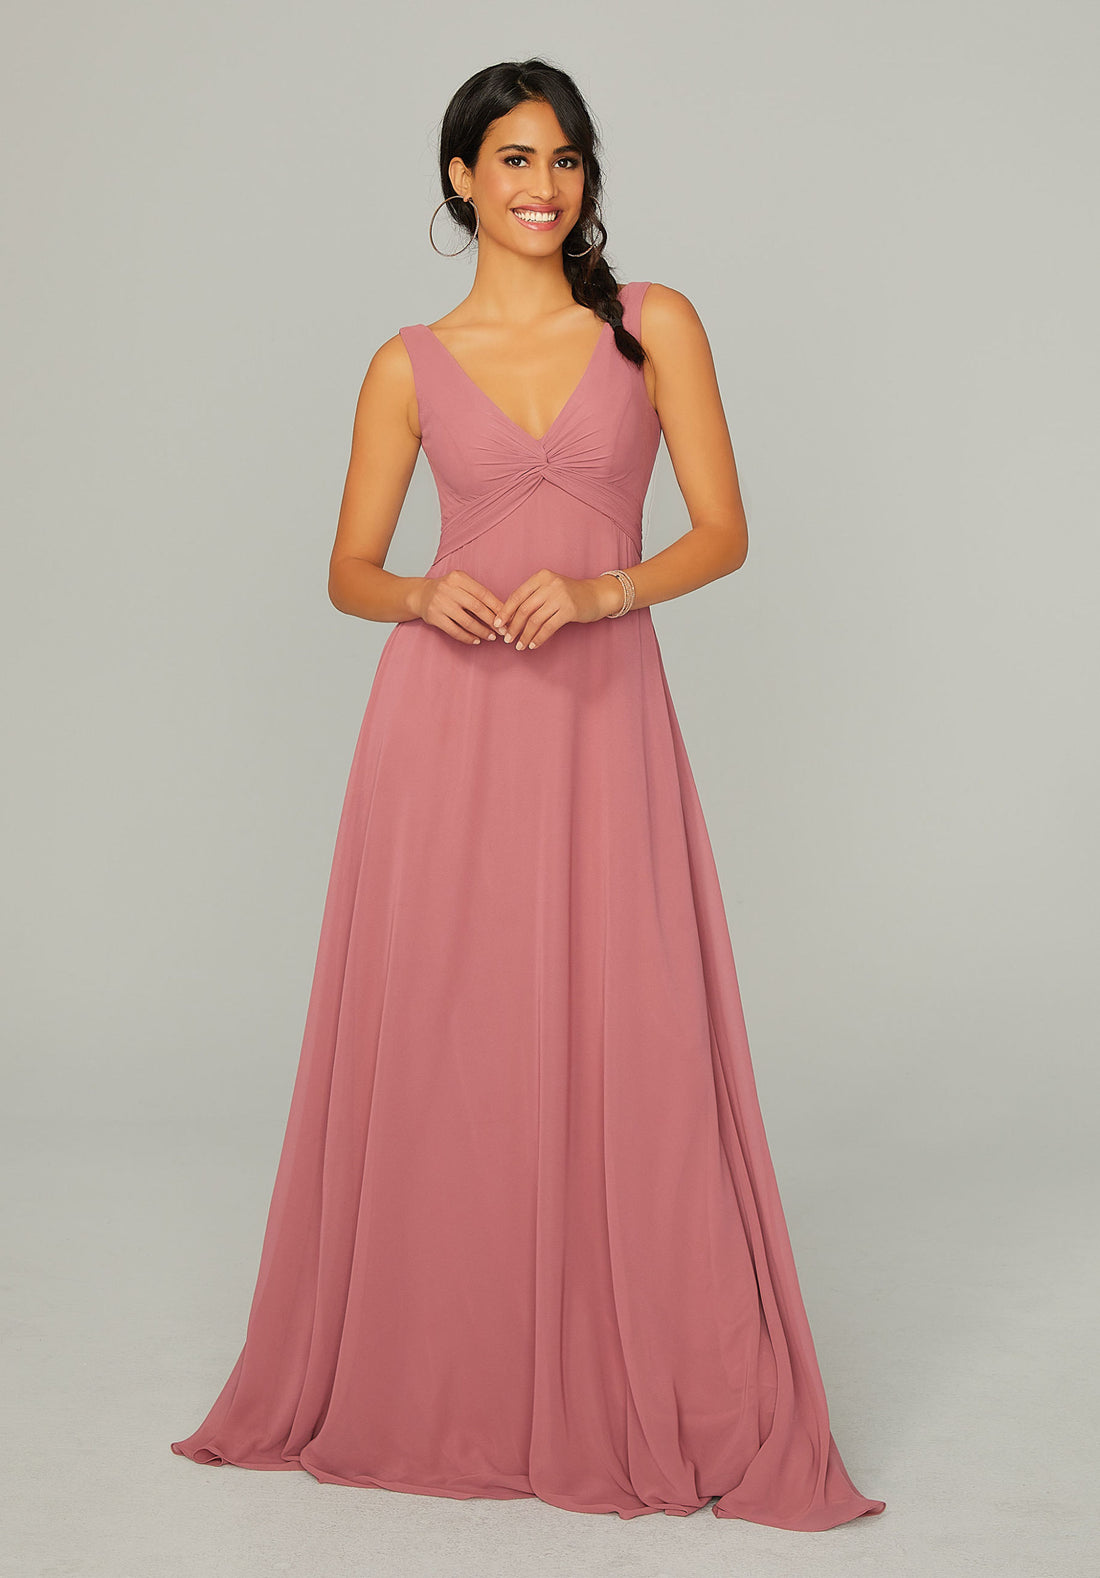 Morilee Knotted Bodice Chiffon Bridesmaid Dress in Bordeaux